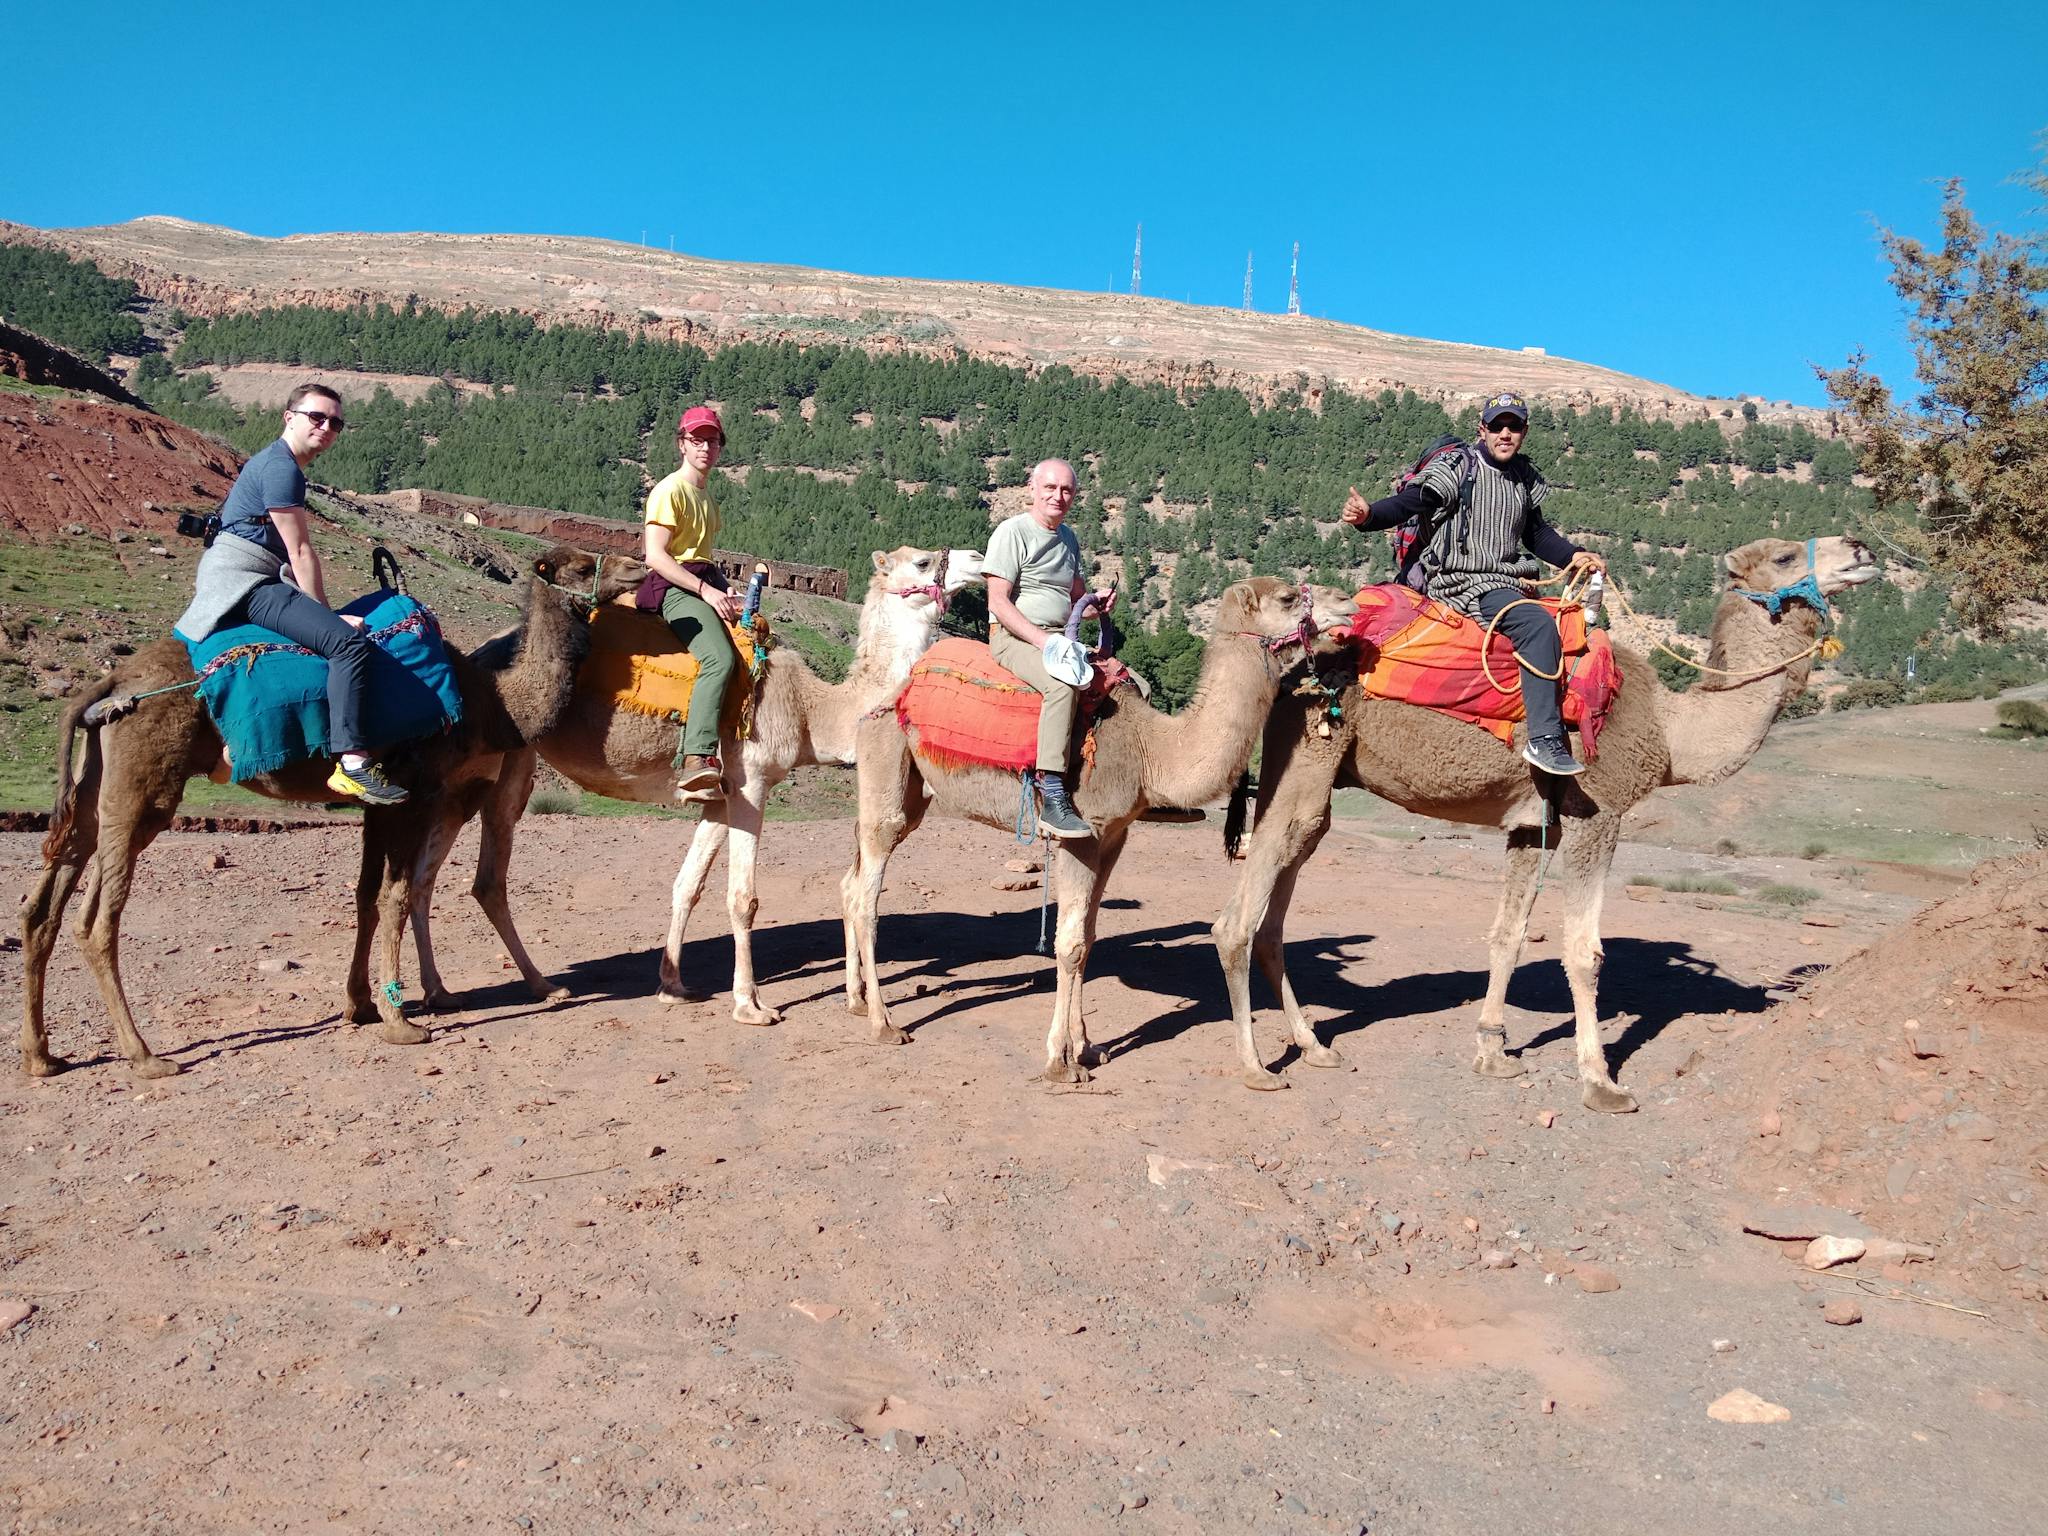 Day trip to the atlas Mount & camel ride